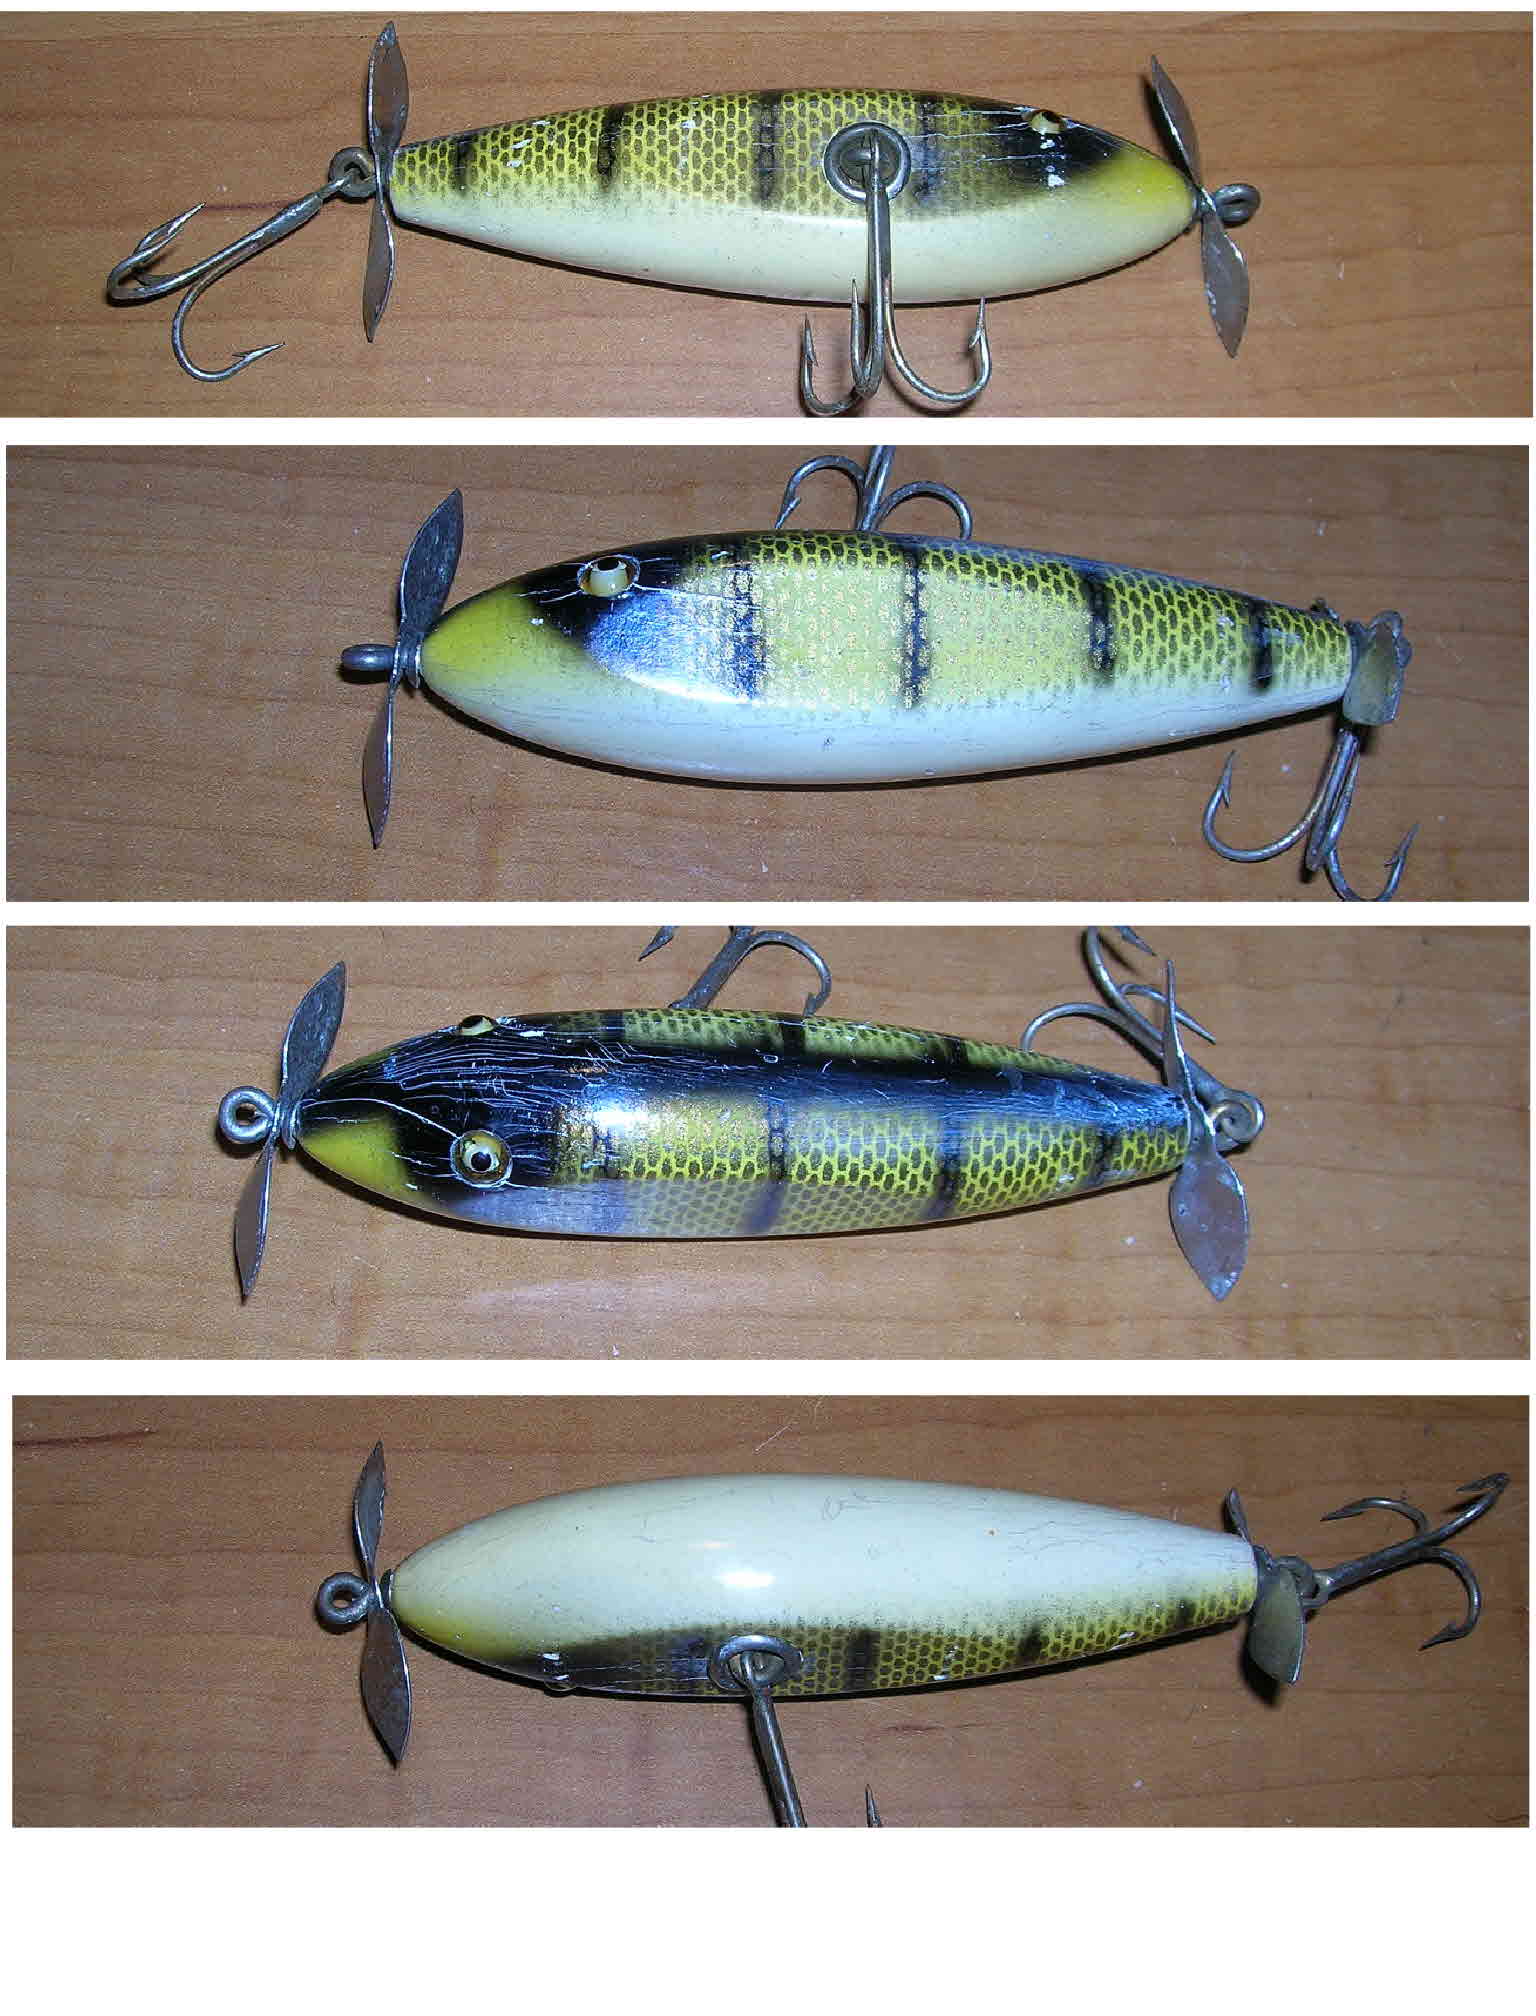 VINTAGE FISHING LURE! SHUR-STRIKE RUNT IN DACE! WOOD WITH GLASS